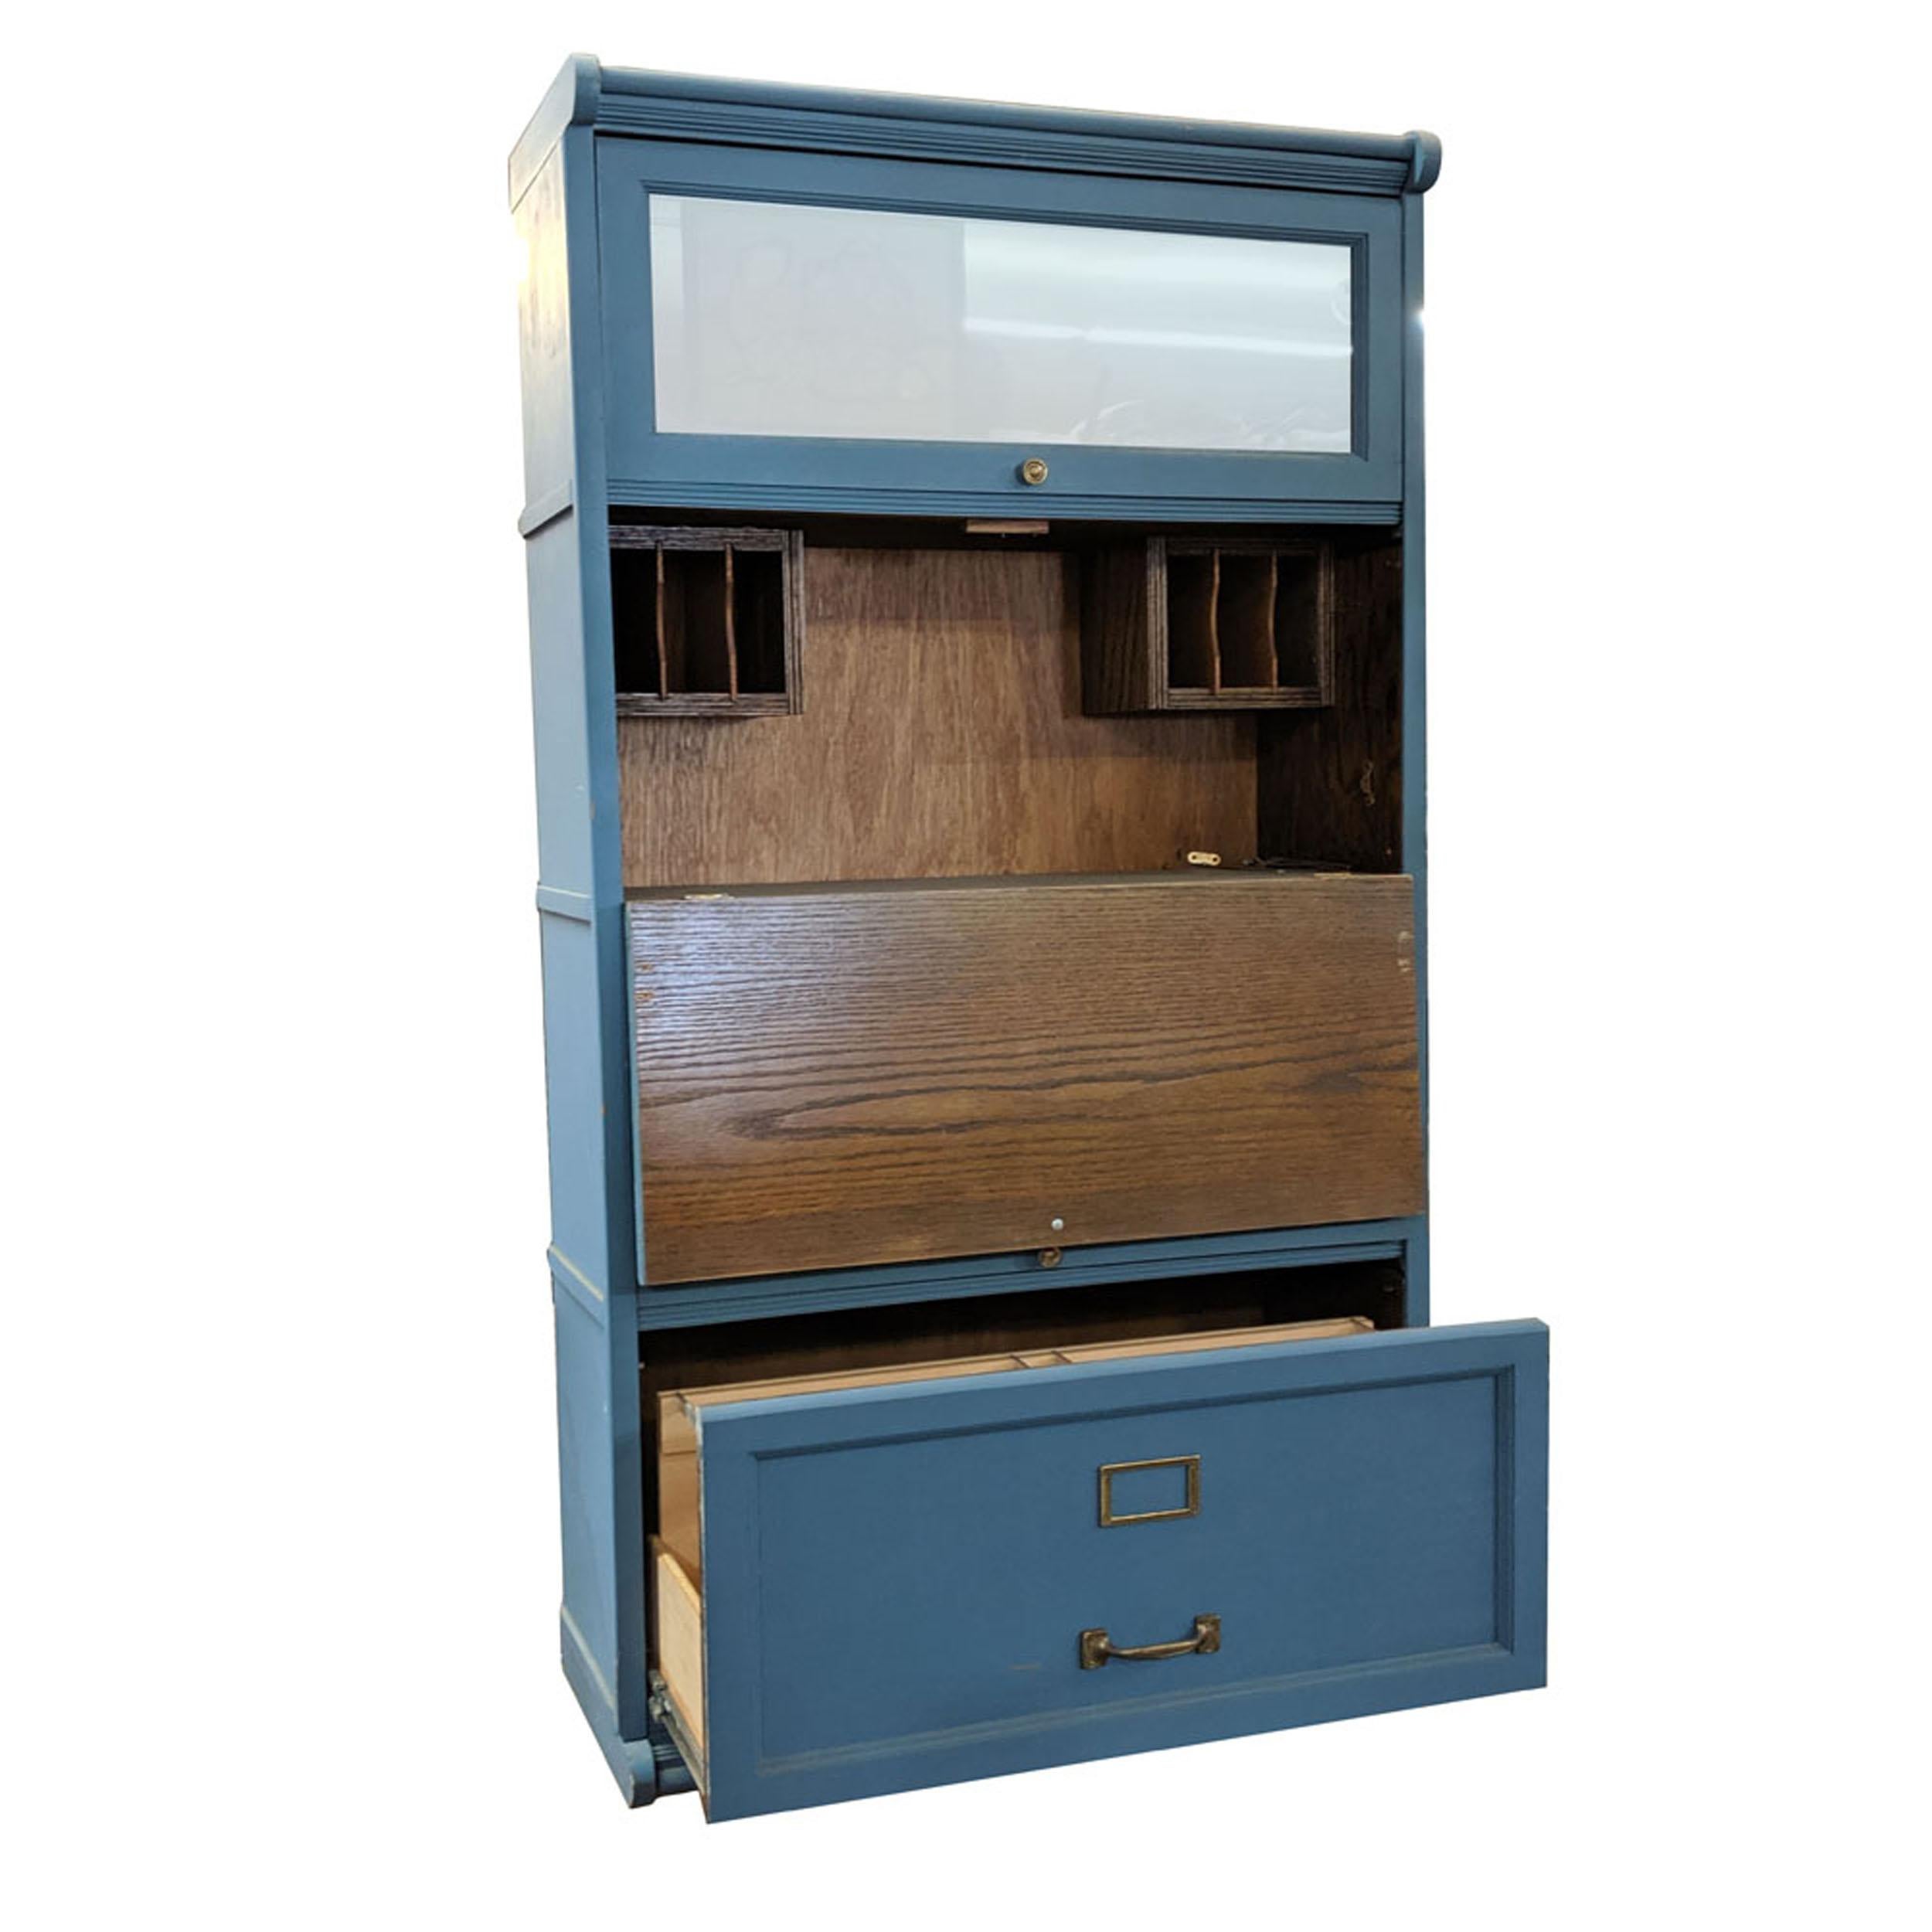 Vintage mid century barrister multi function bookcase file cabinet

Unusual version of a barrister bookcase.
Antique blue with file drawer, secretary work space and book storage.